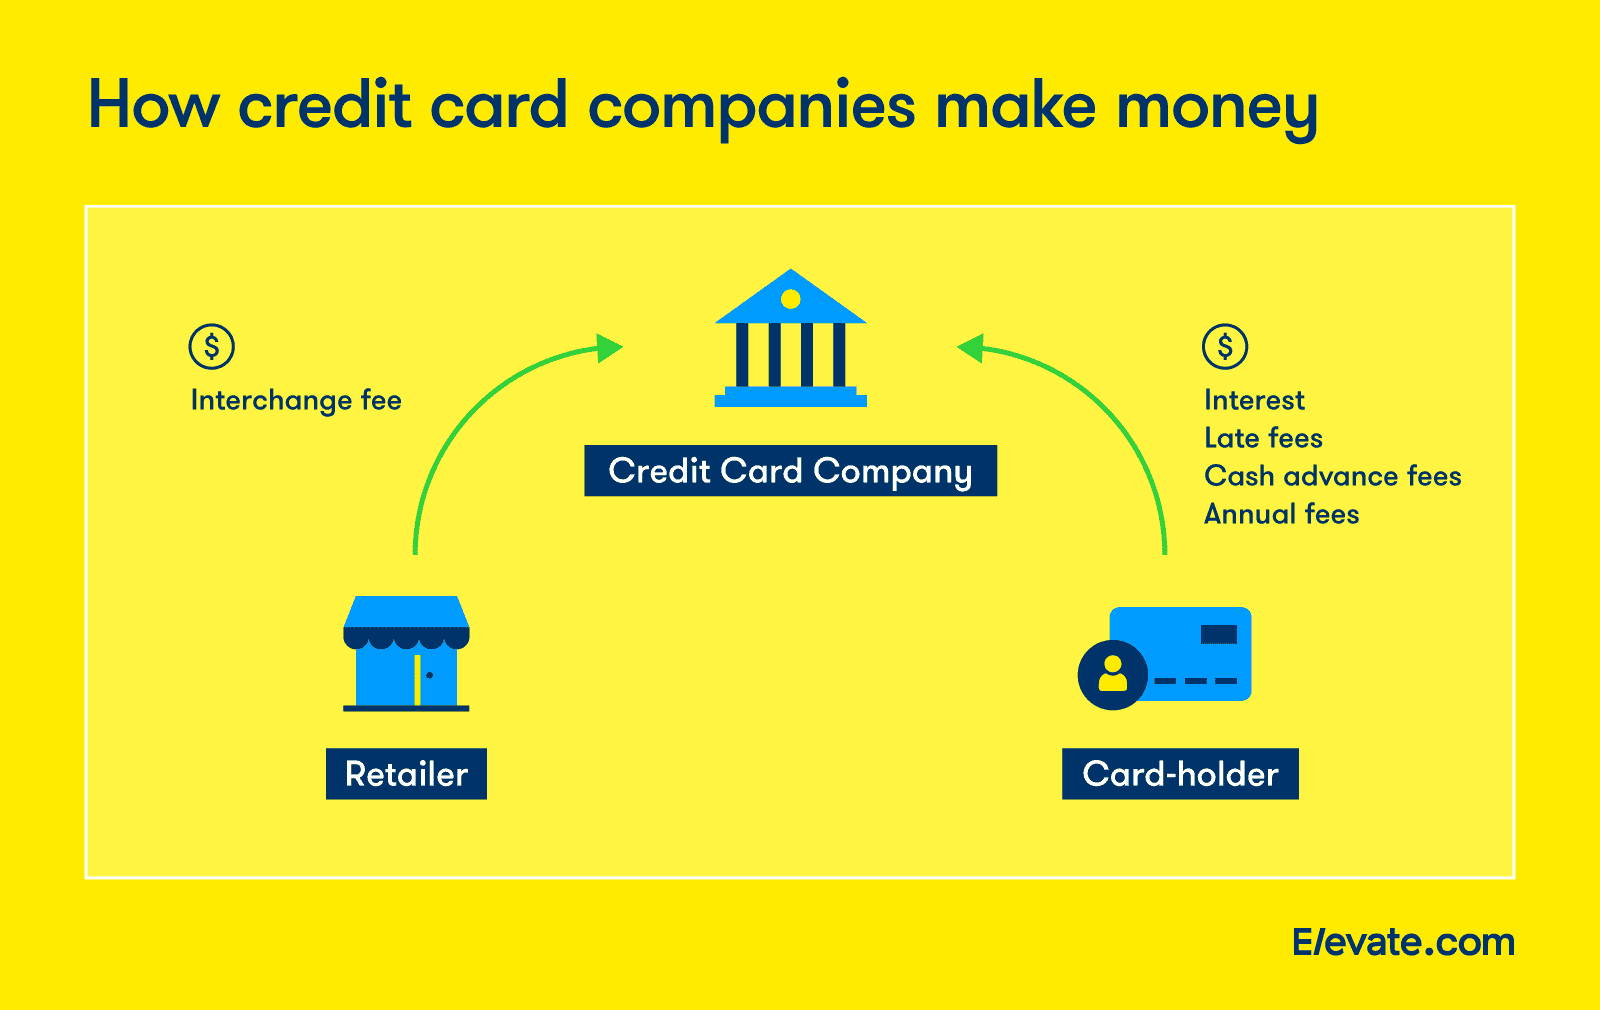 How credit card companies make money.  They make money from retailers through interchange fees and from card holders through interest, late fees, cash advance fees, and annual fees.